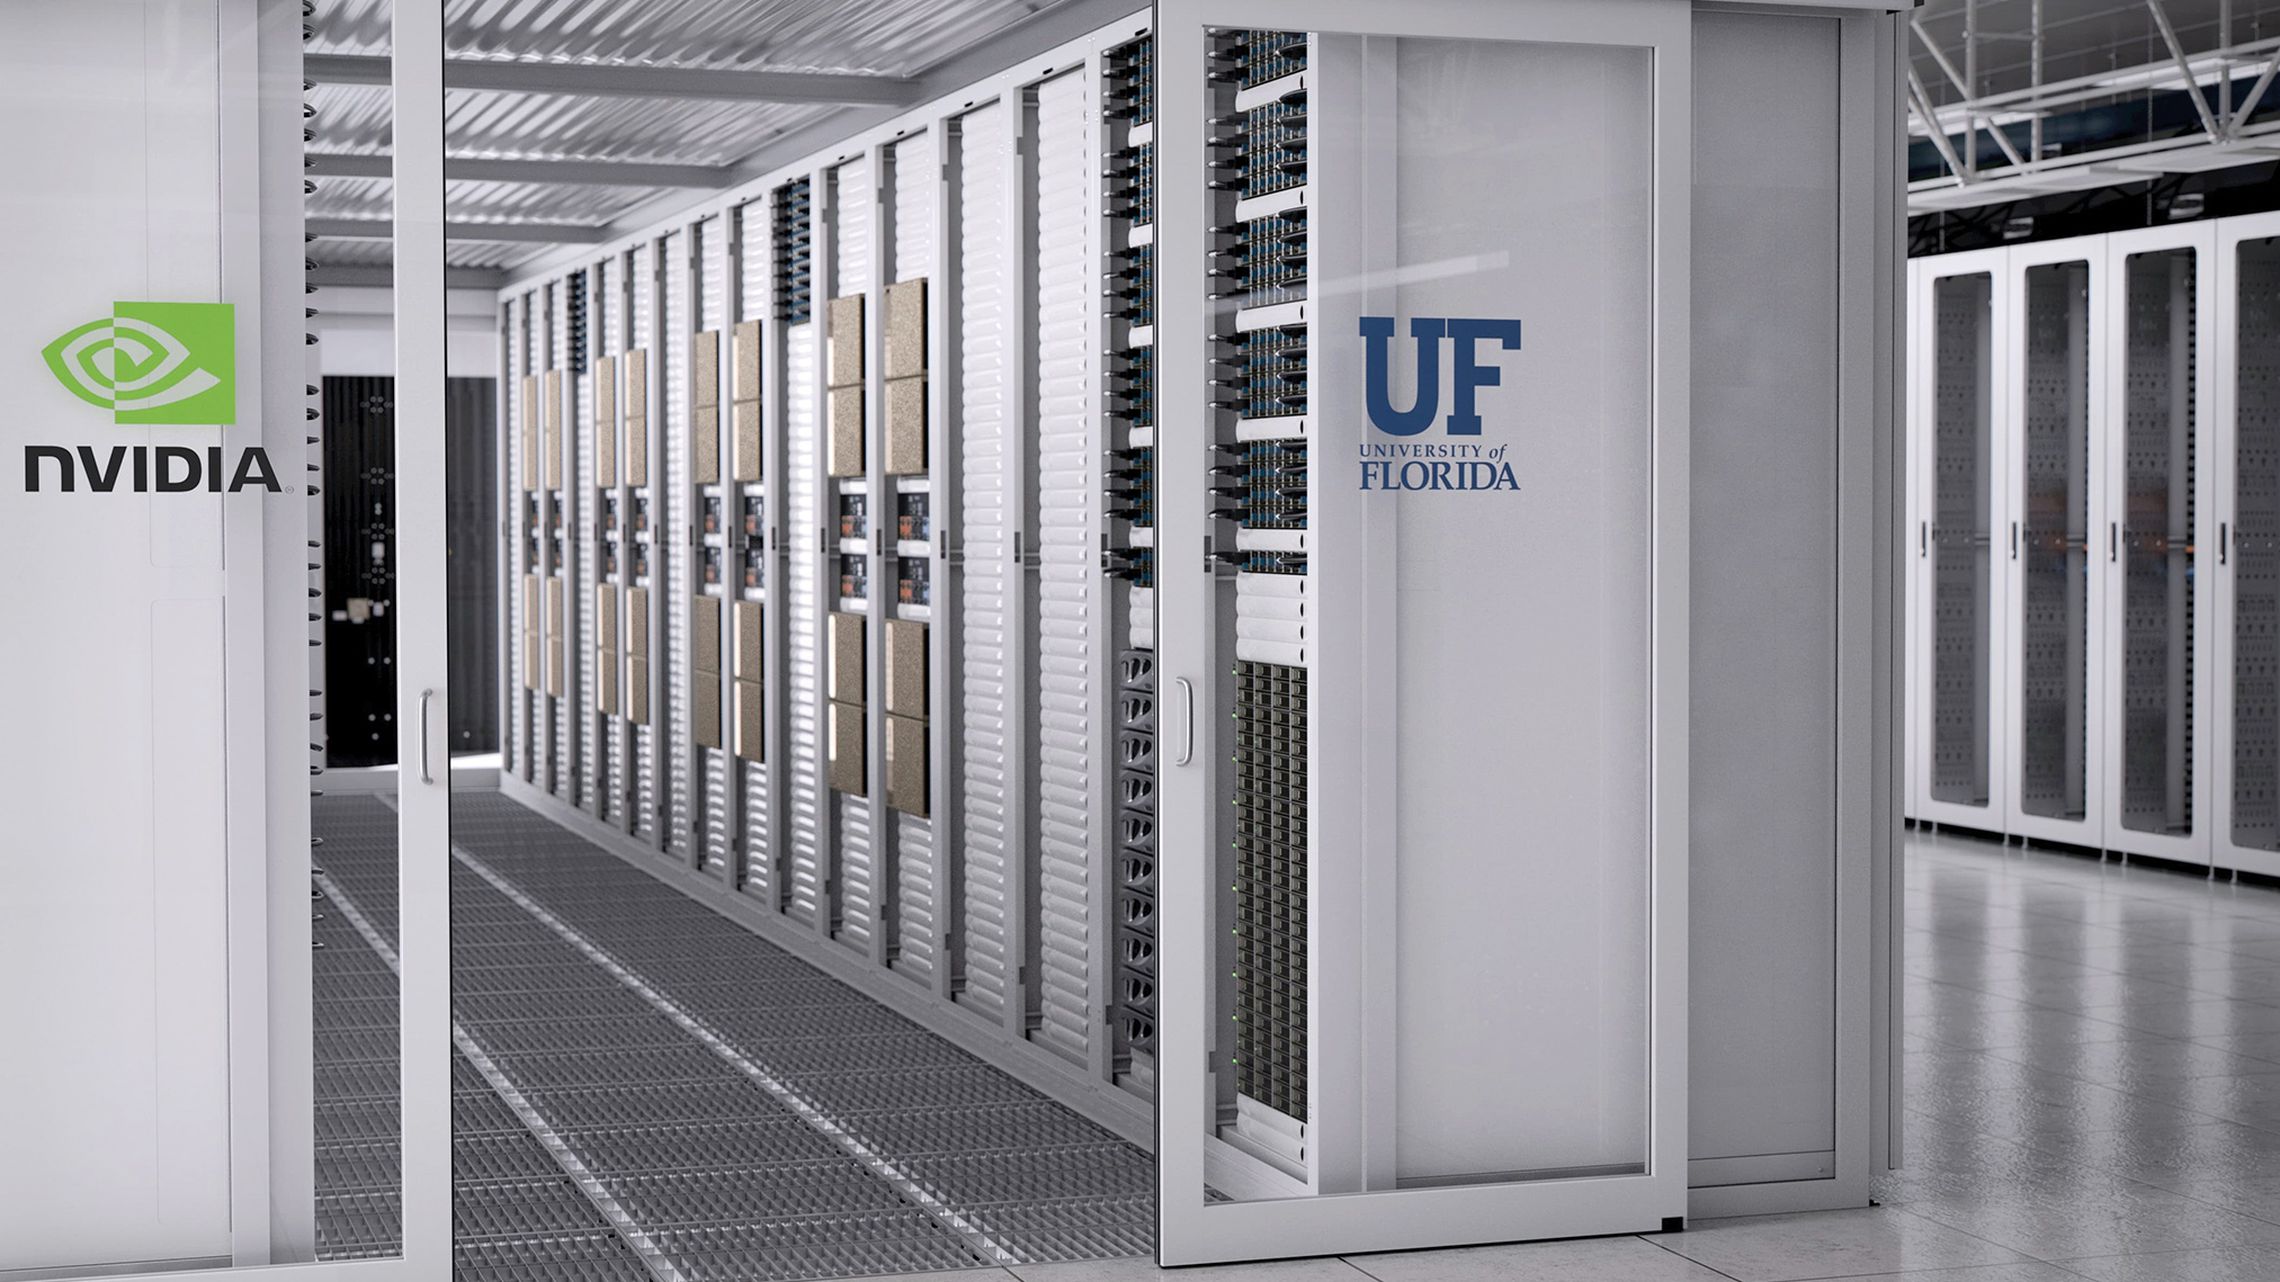 UF's supercomputer ranks first in the U.S. for energy efficiency